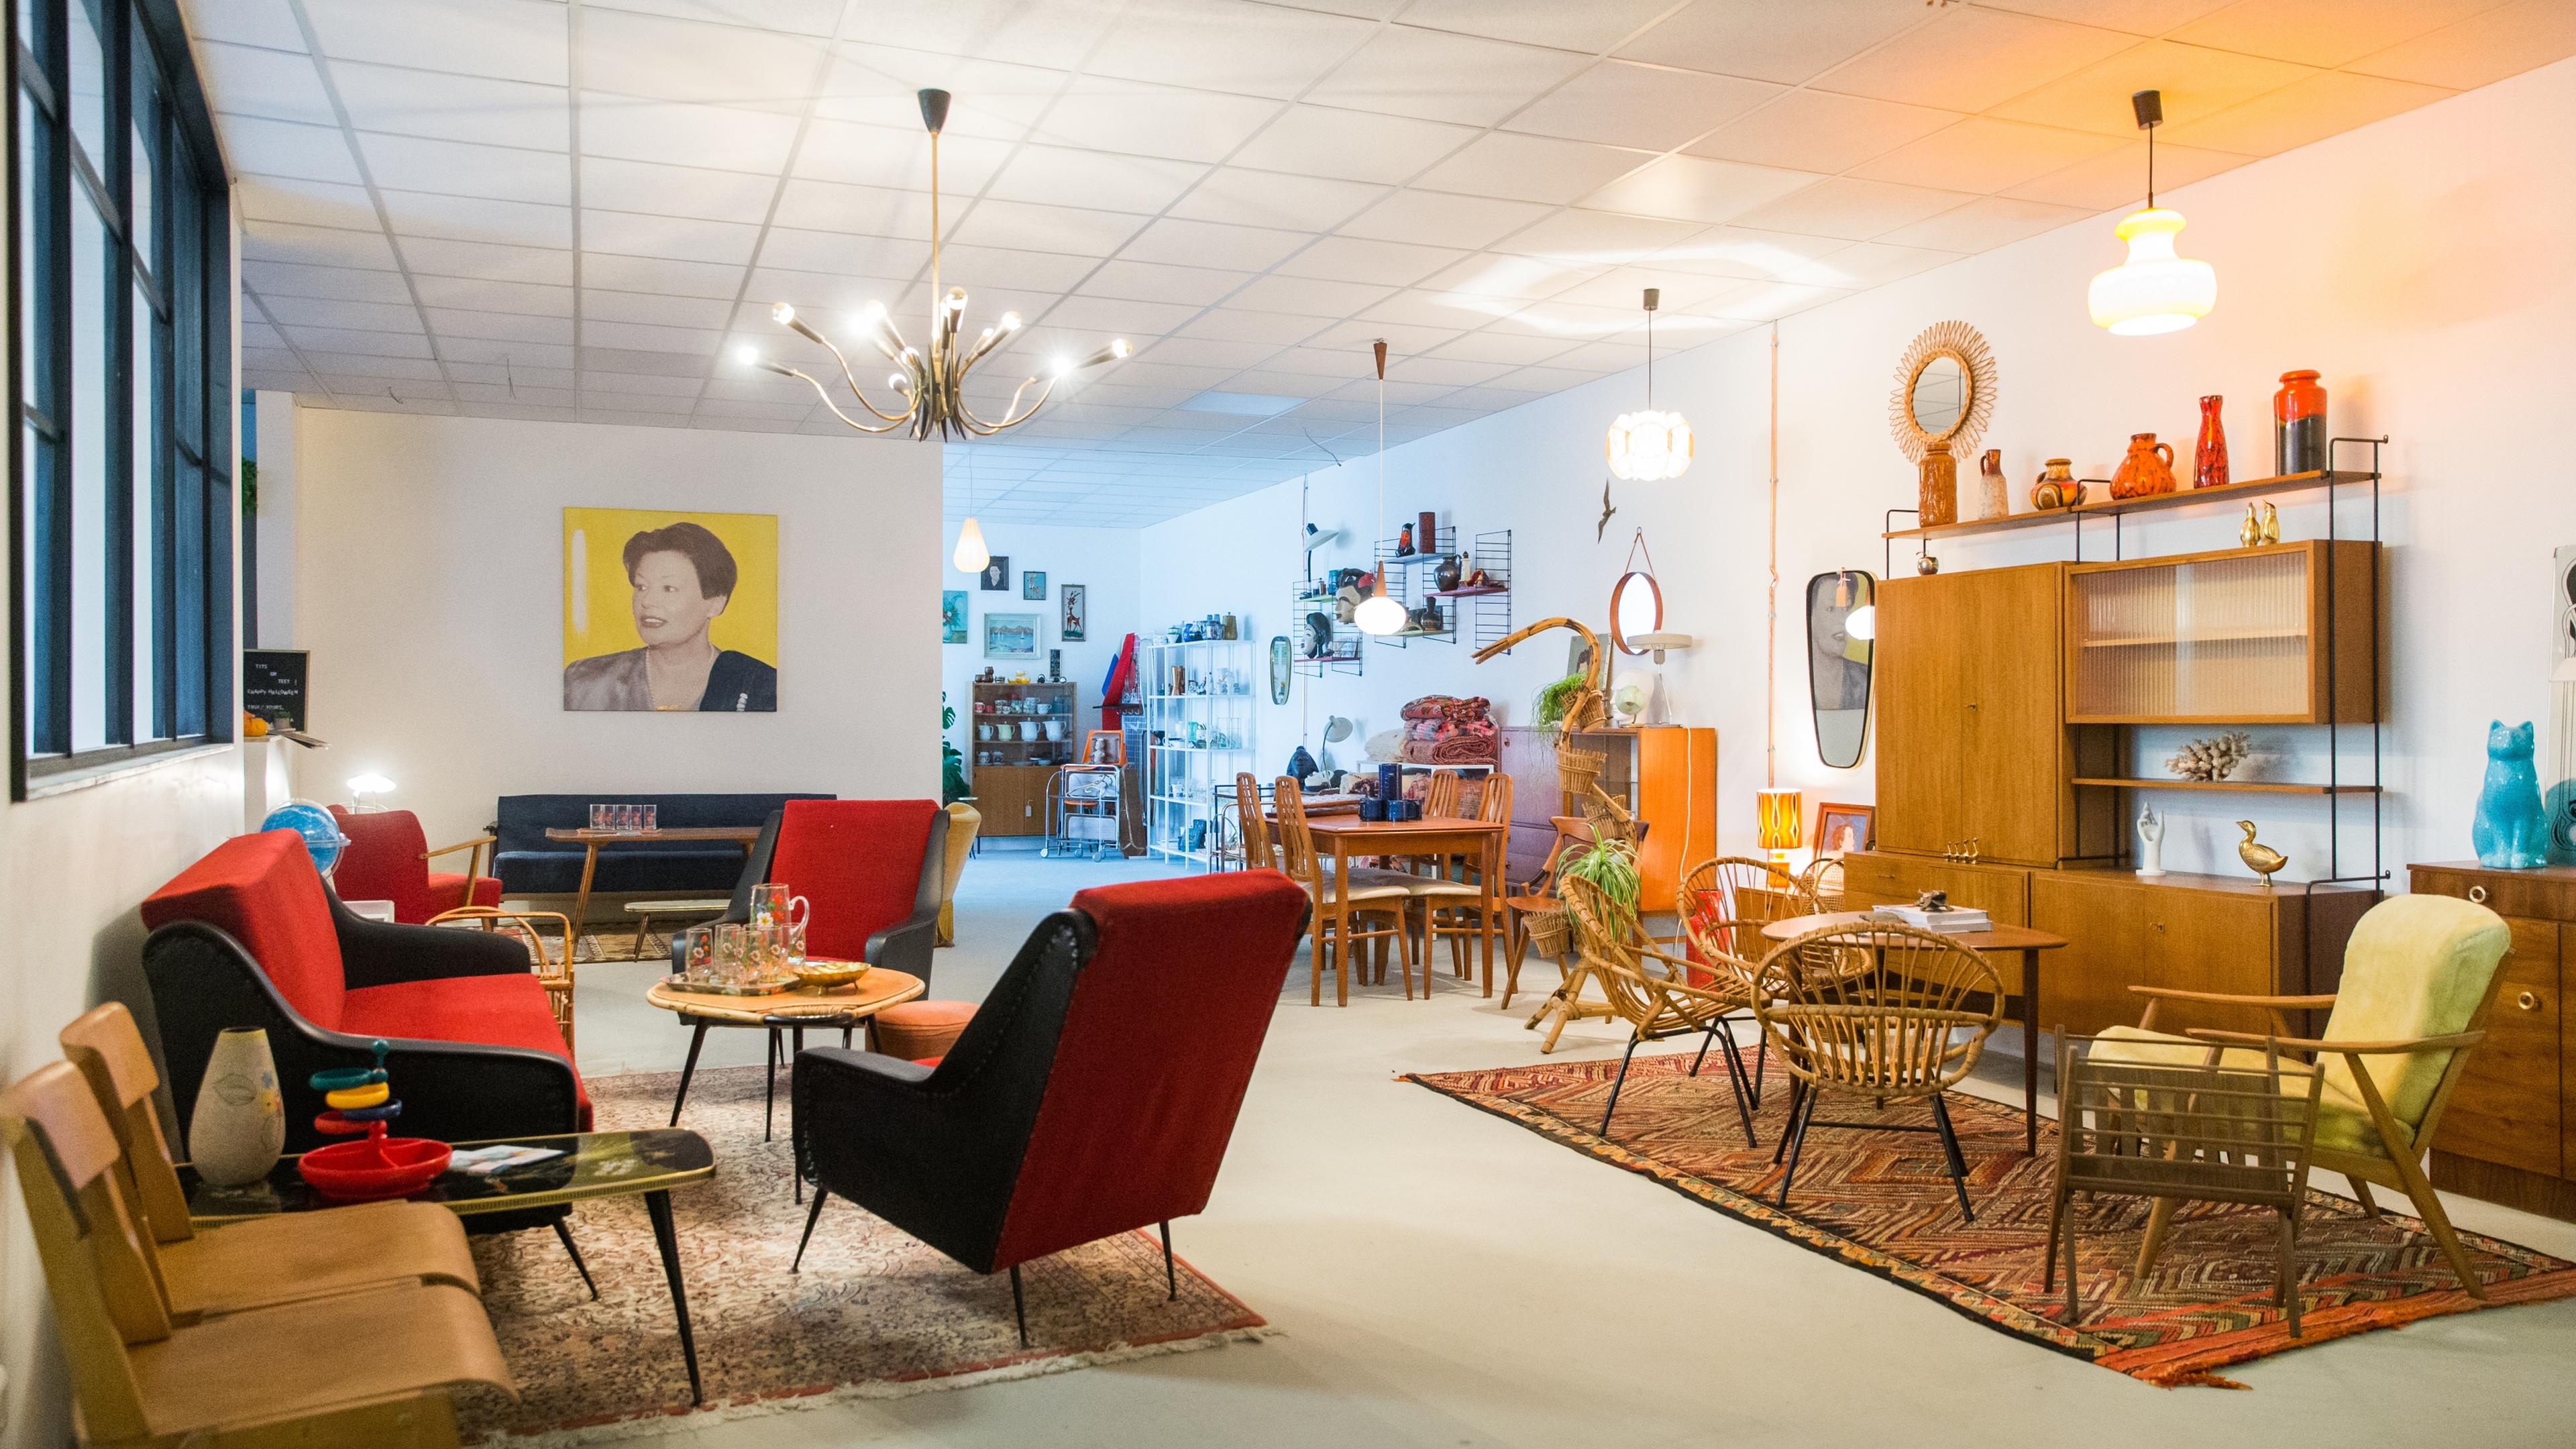 Oddhaus Vintage gets rave reviews from customers 